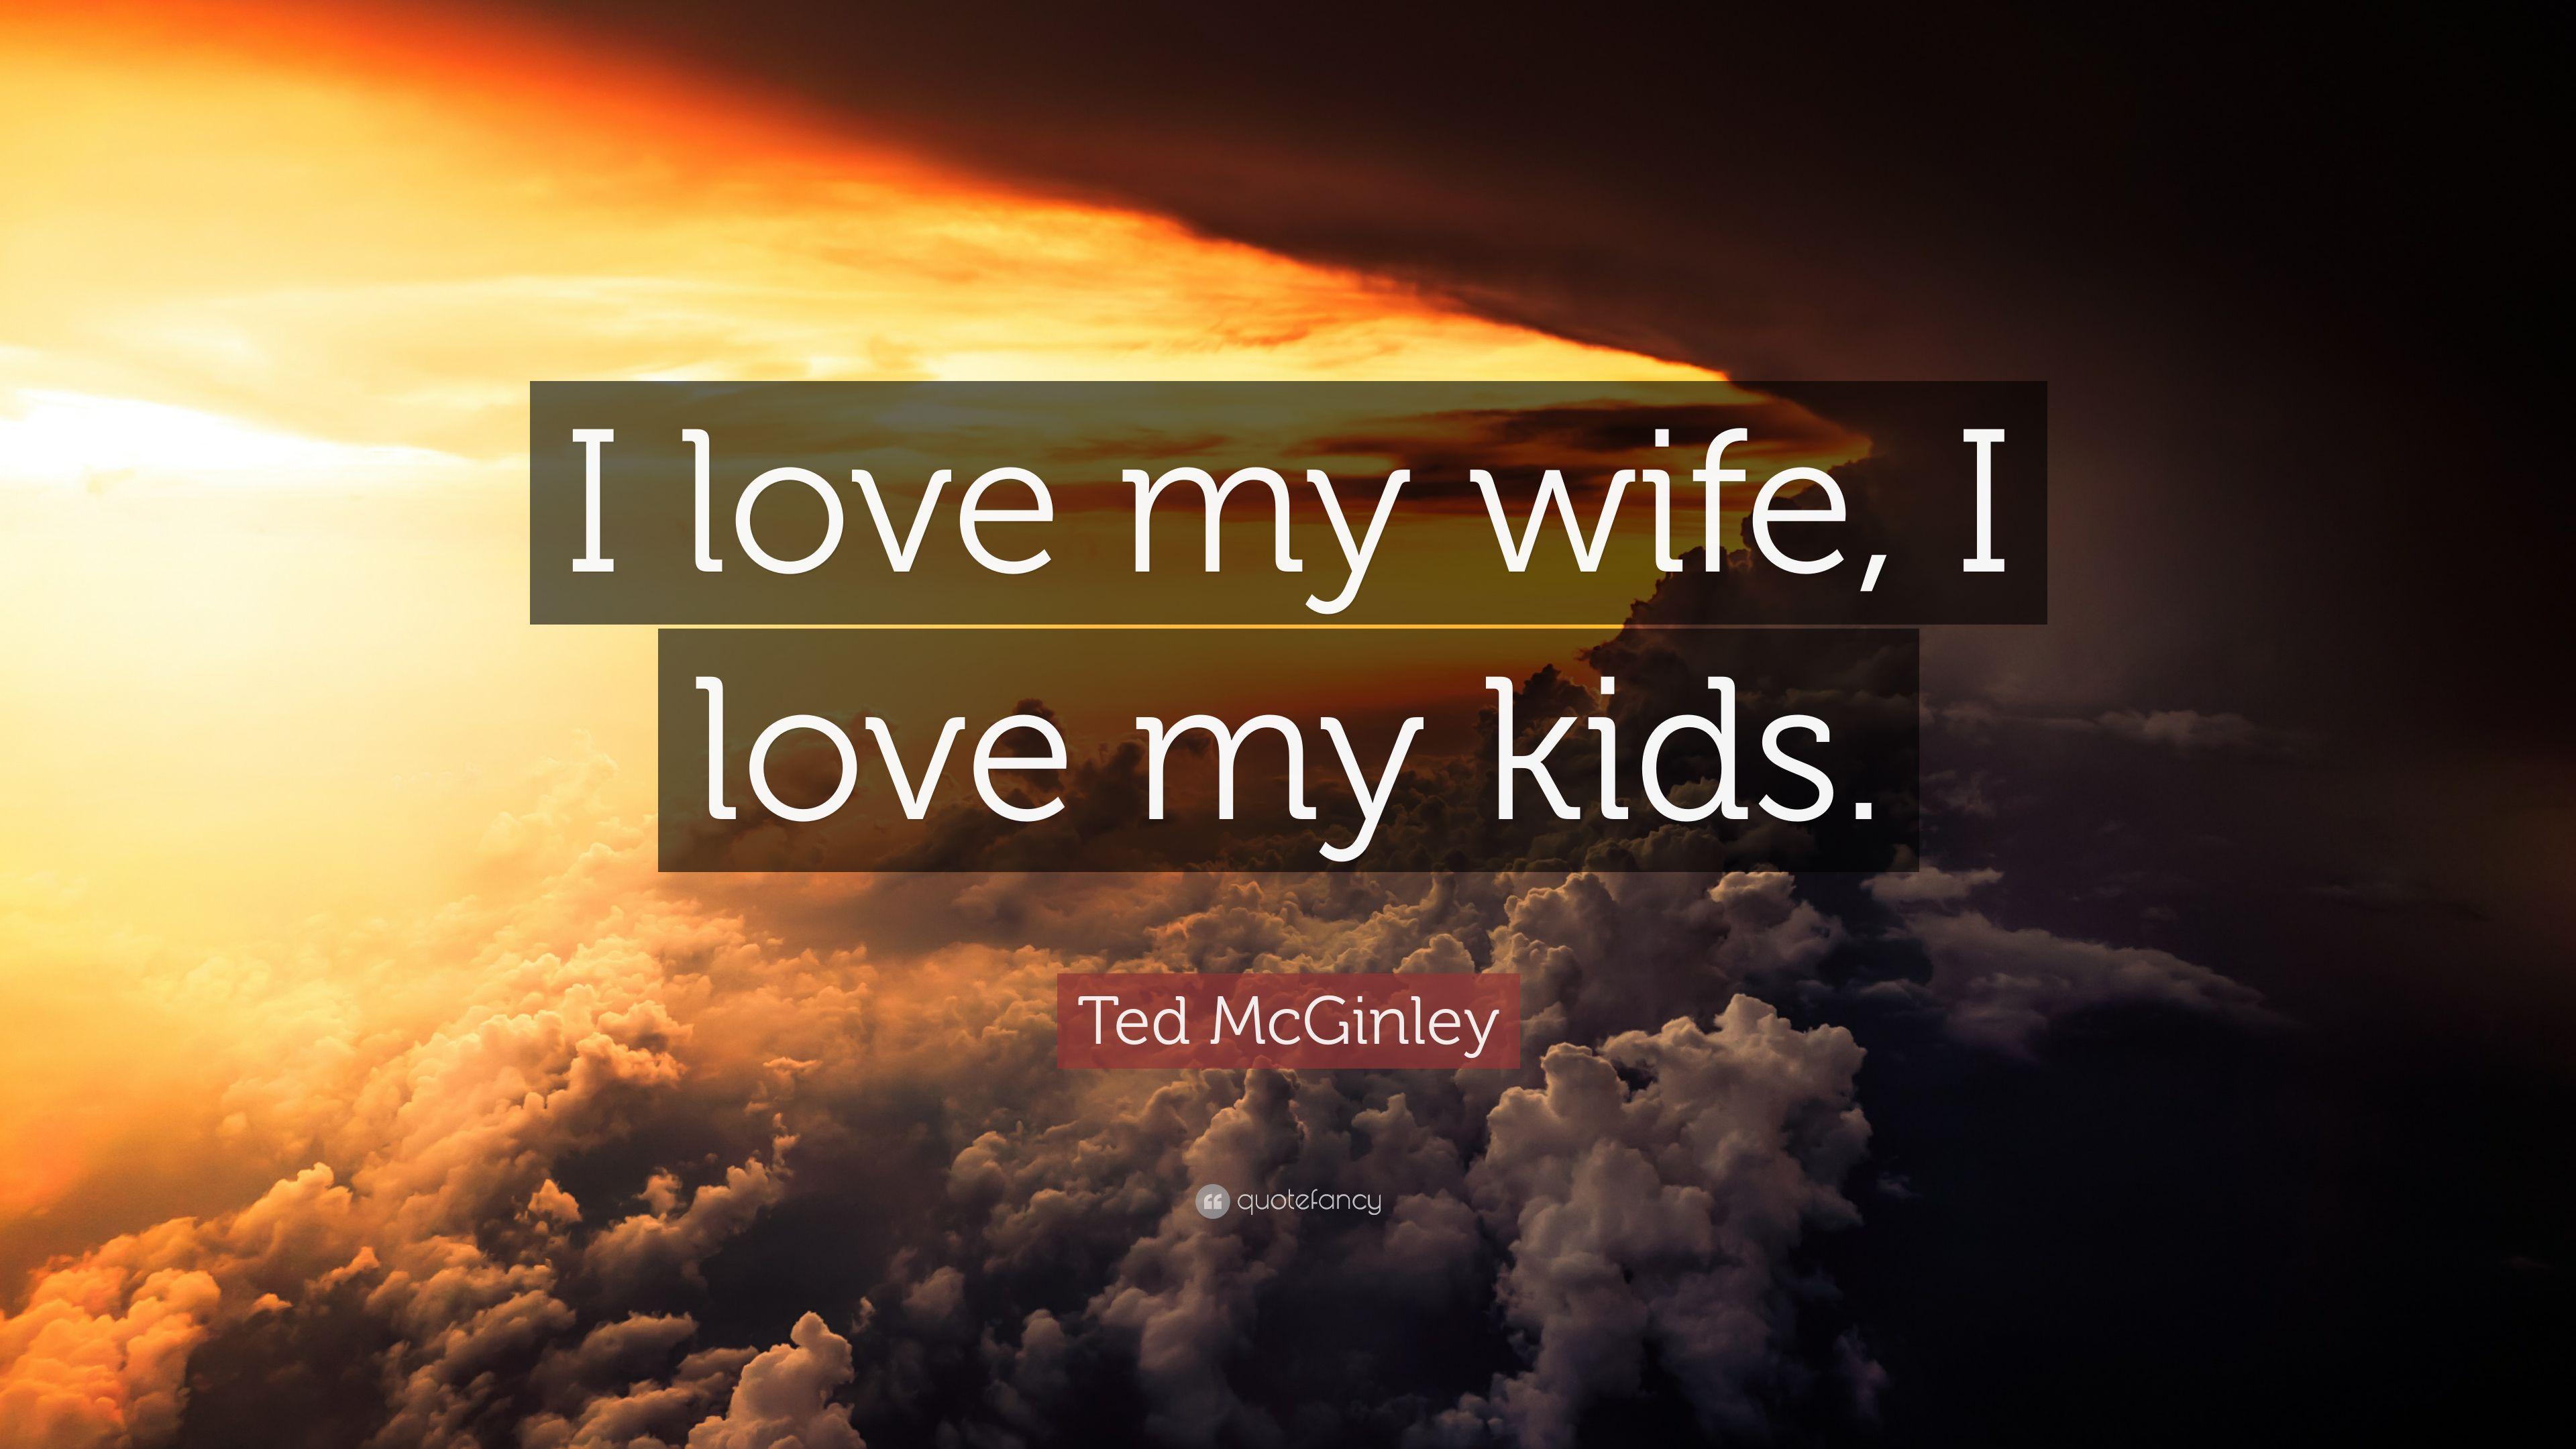 Ted McGinley Quote: “I love my wife, I love my kids.” 12 wallpaper